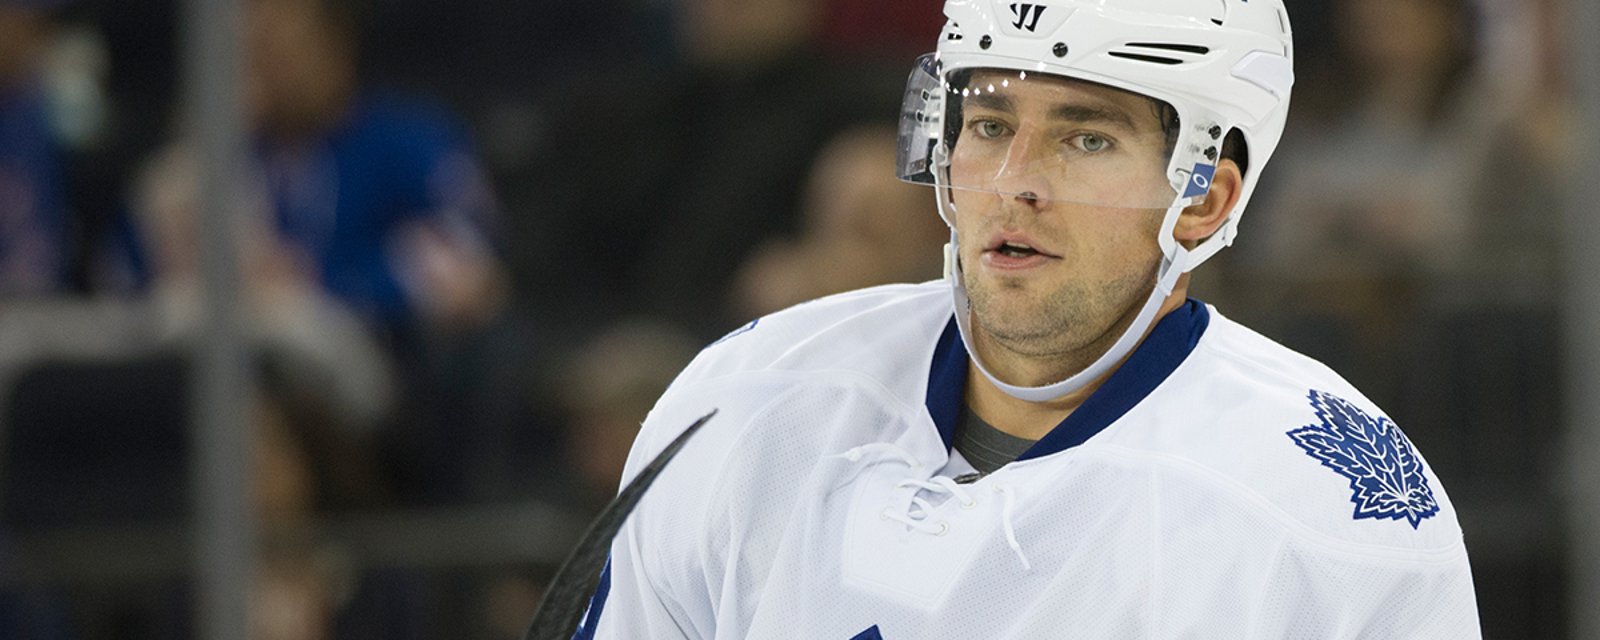 Report: Leafs facing HUGE cap issue with Lupul